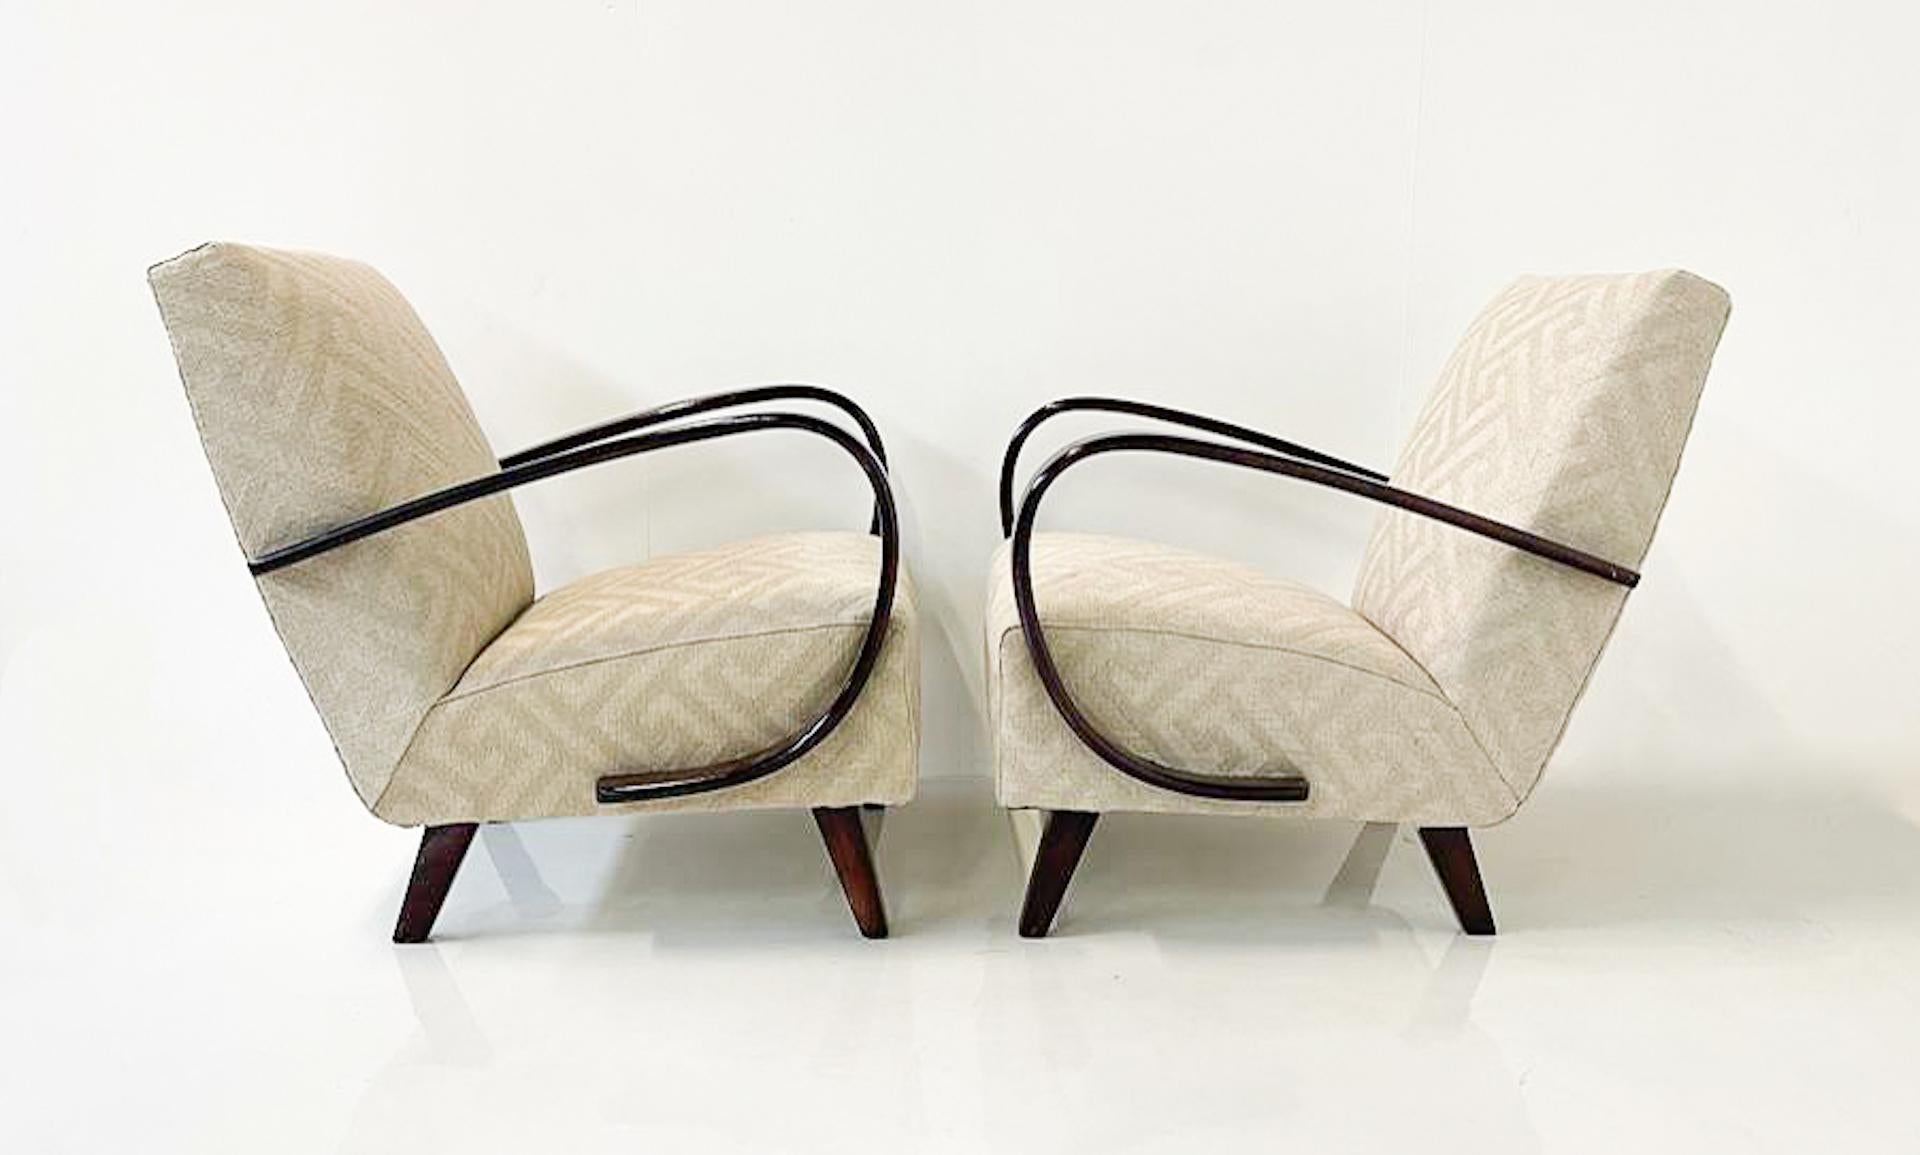 Fabric Pair of Bentwood Armchairs by Jindrich Halabala - Czech Republic 1940s For Sale